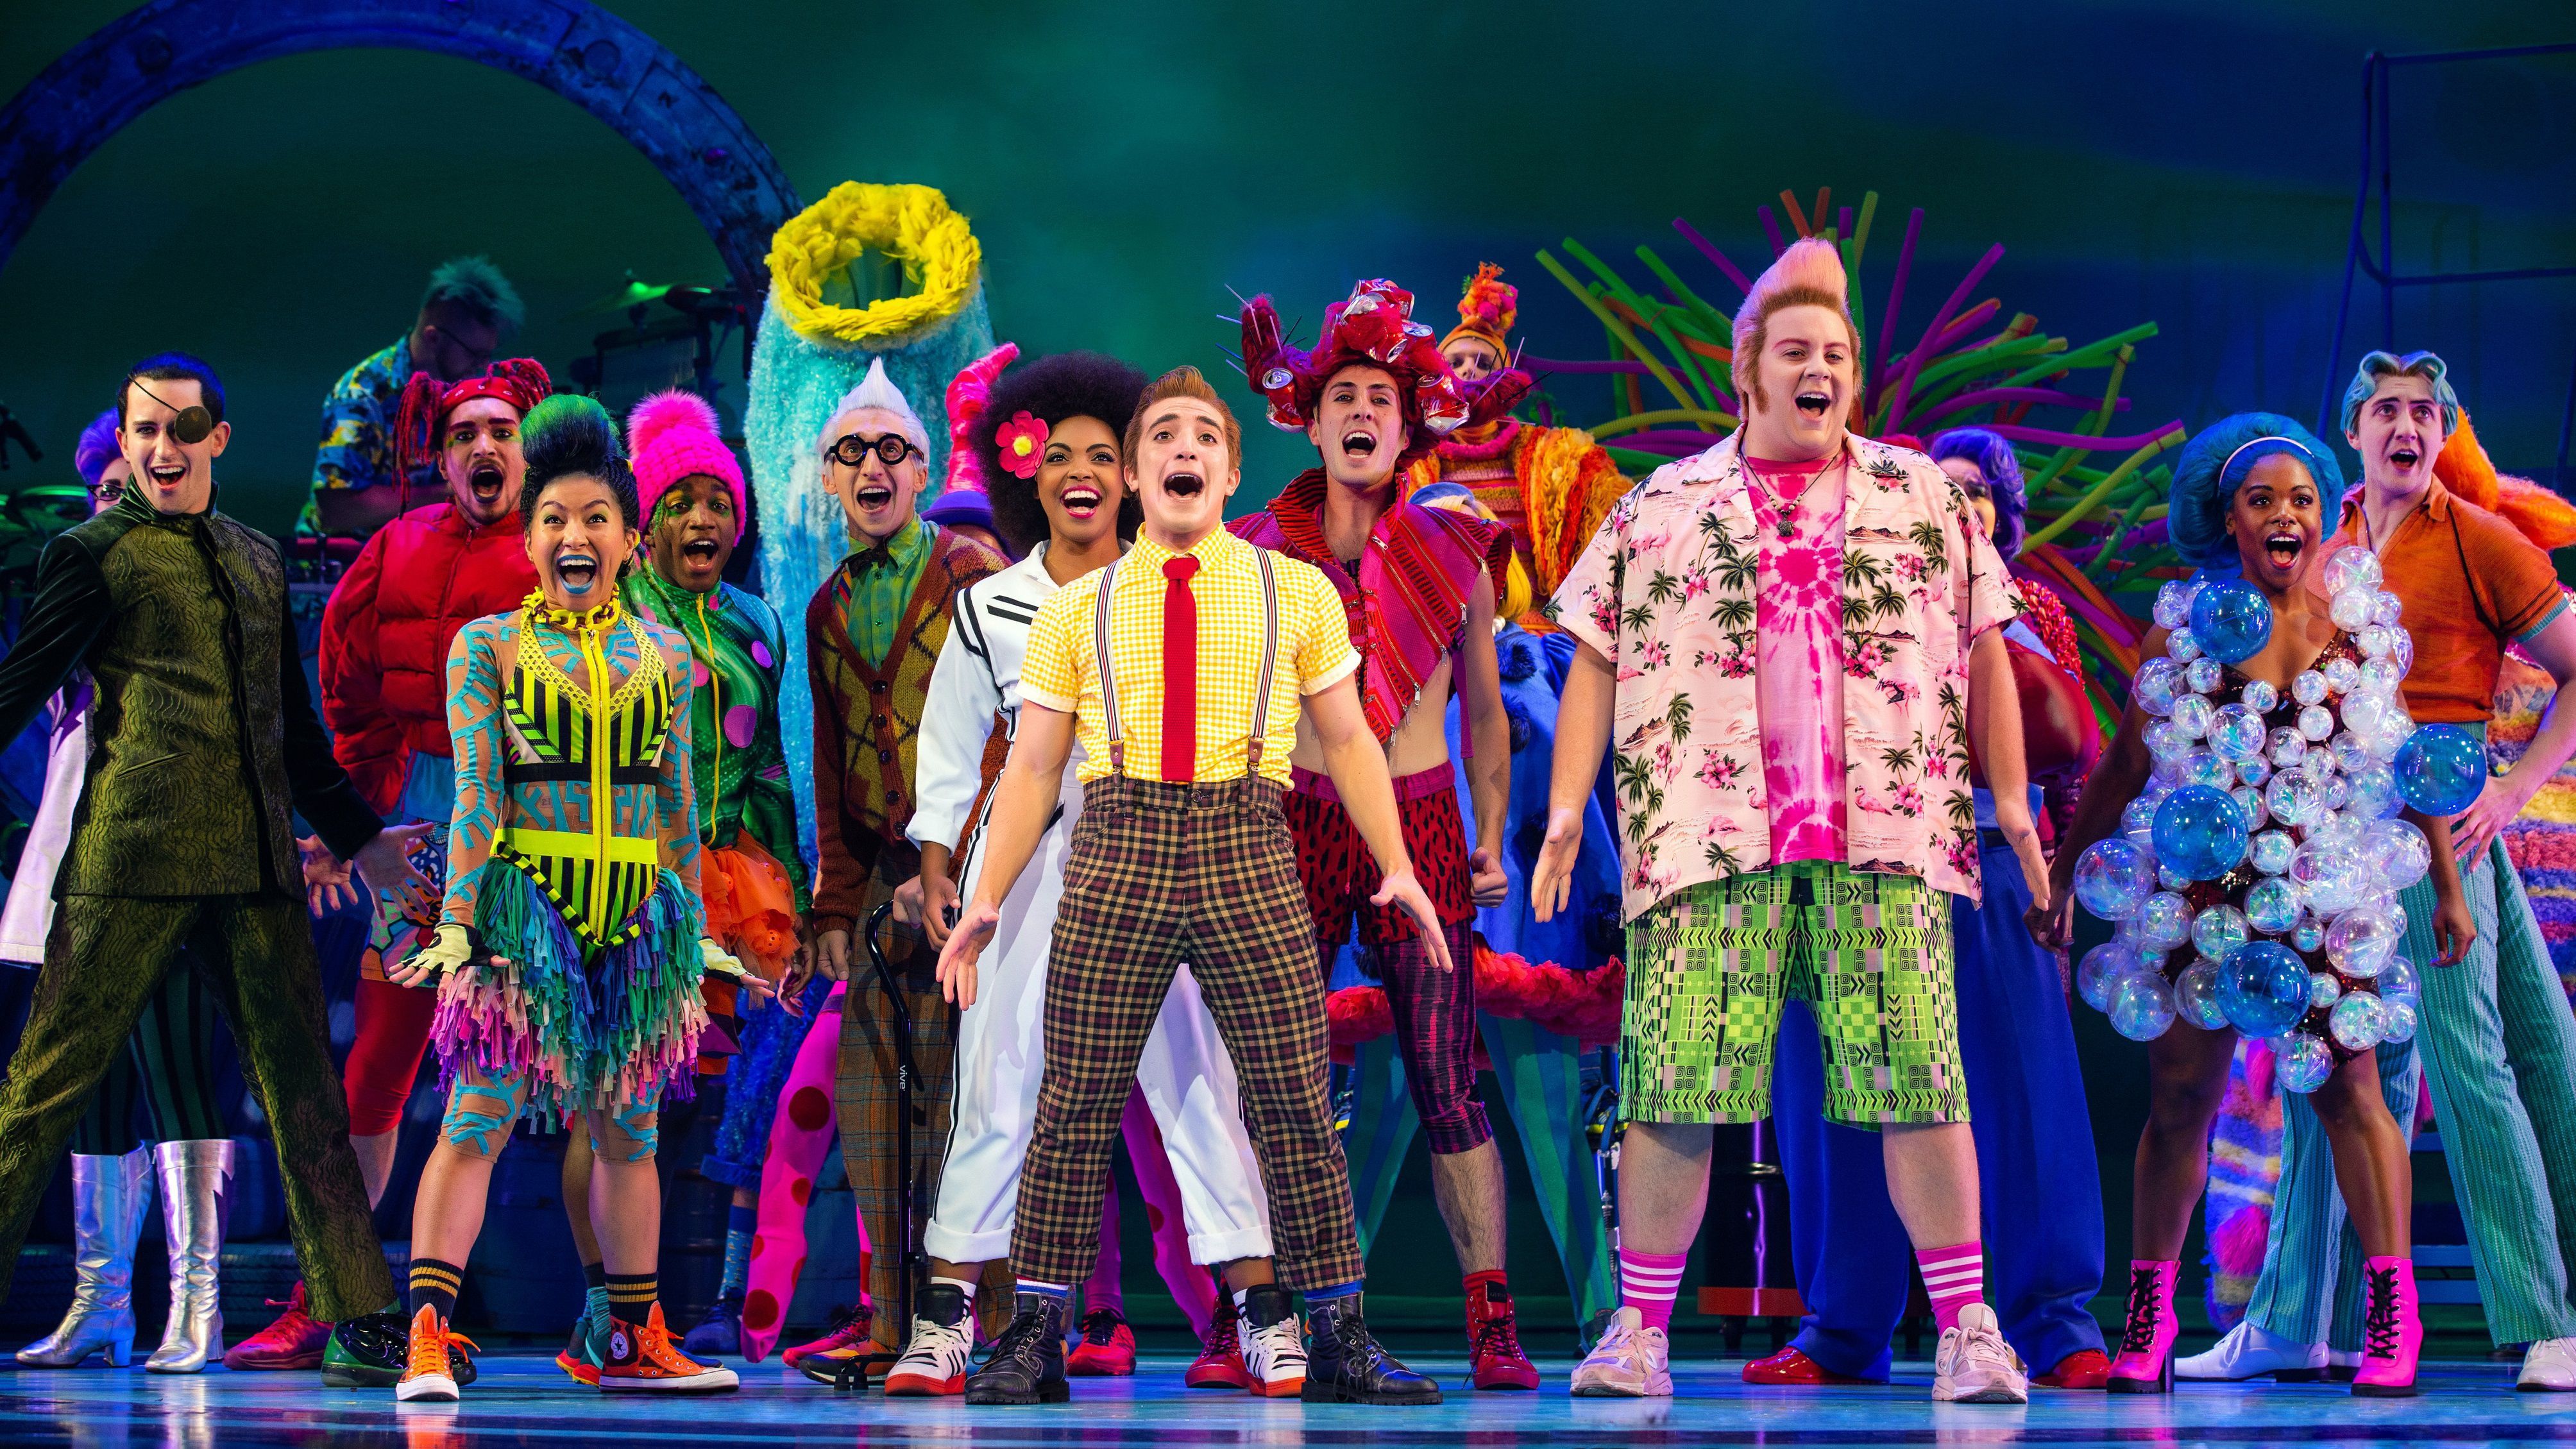 The Spongebob Musical At Forrest Theatre Is Gloriously Giddy And Smart Too